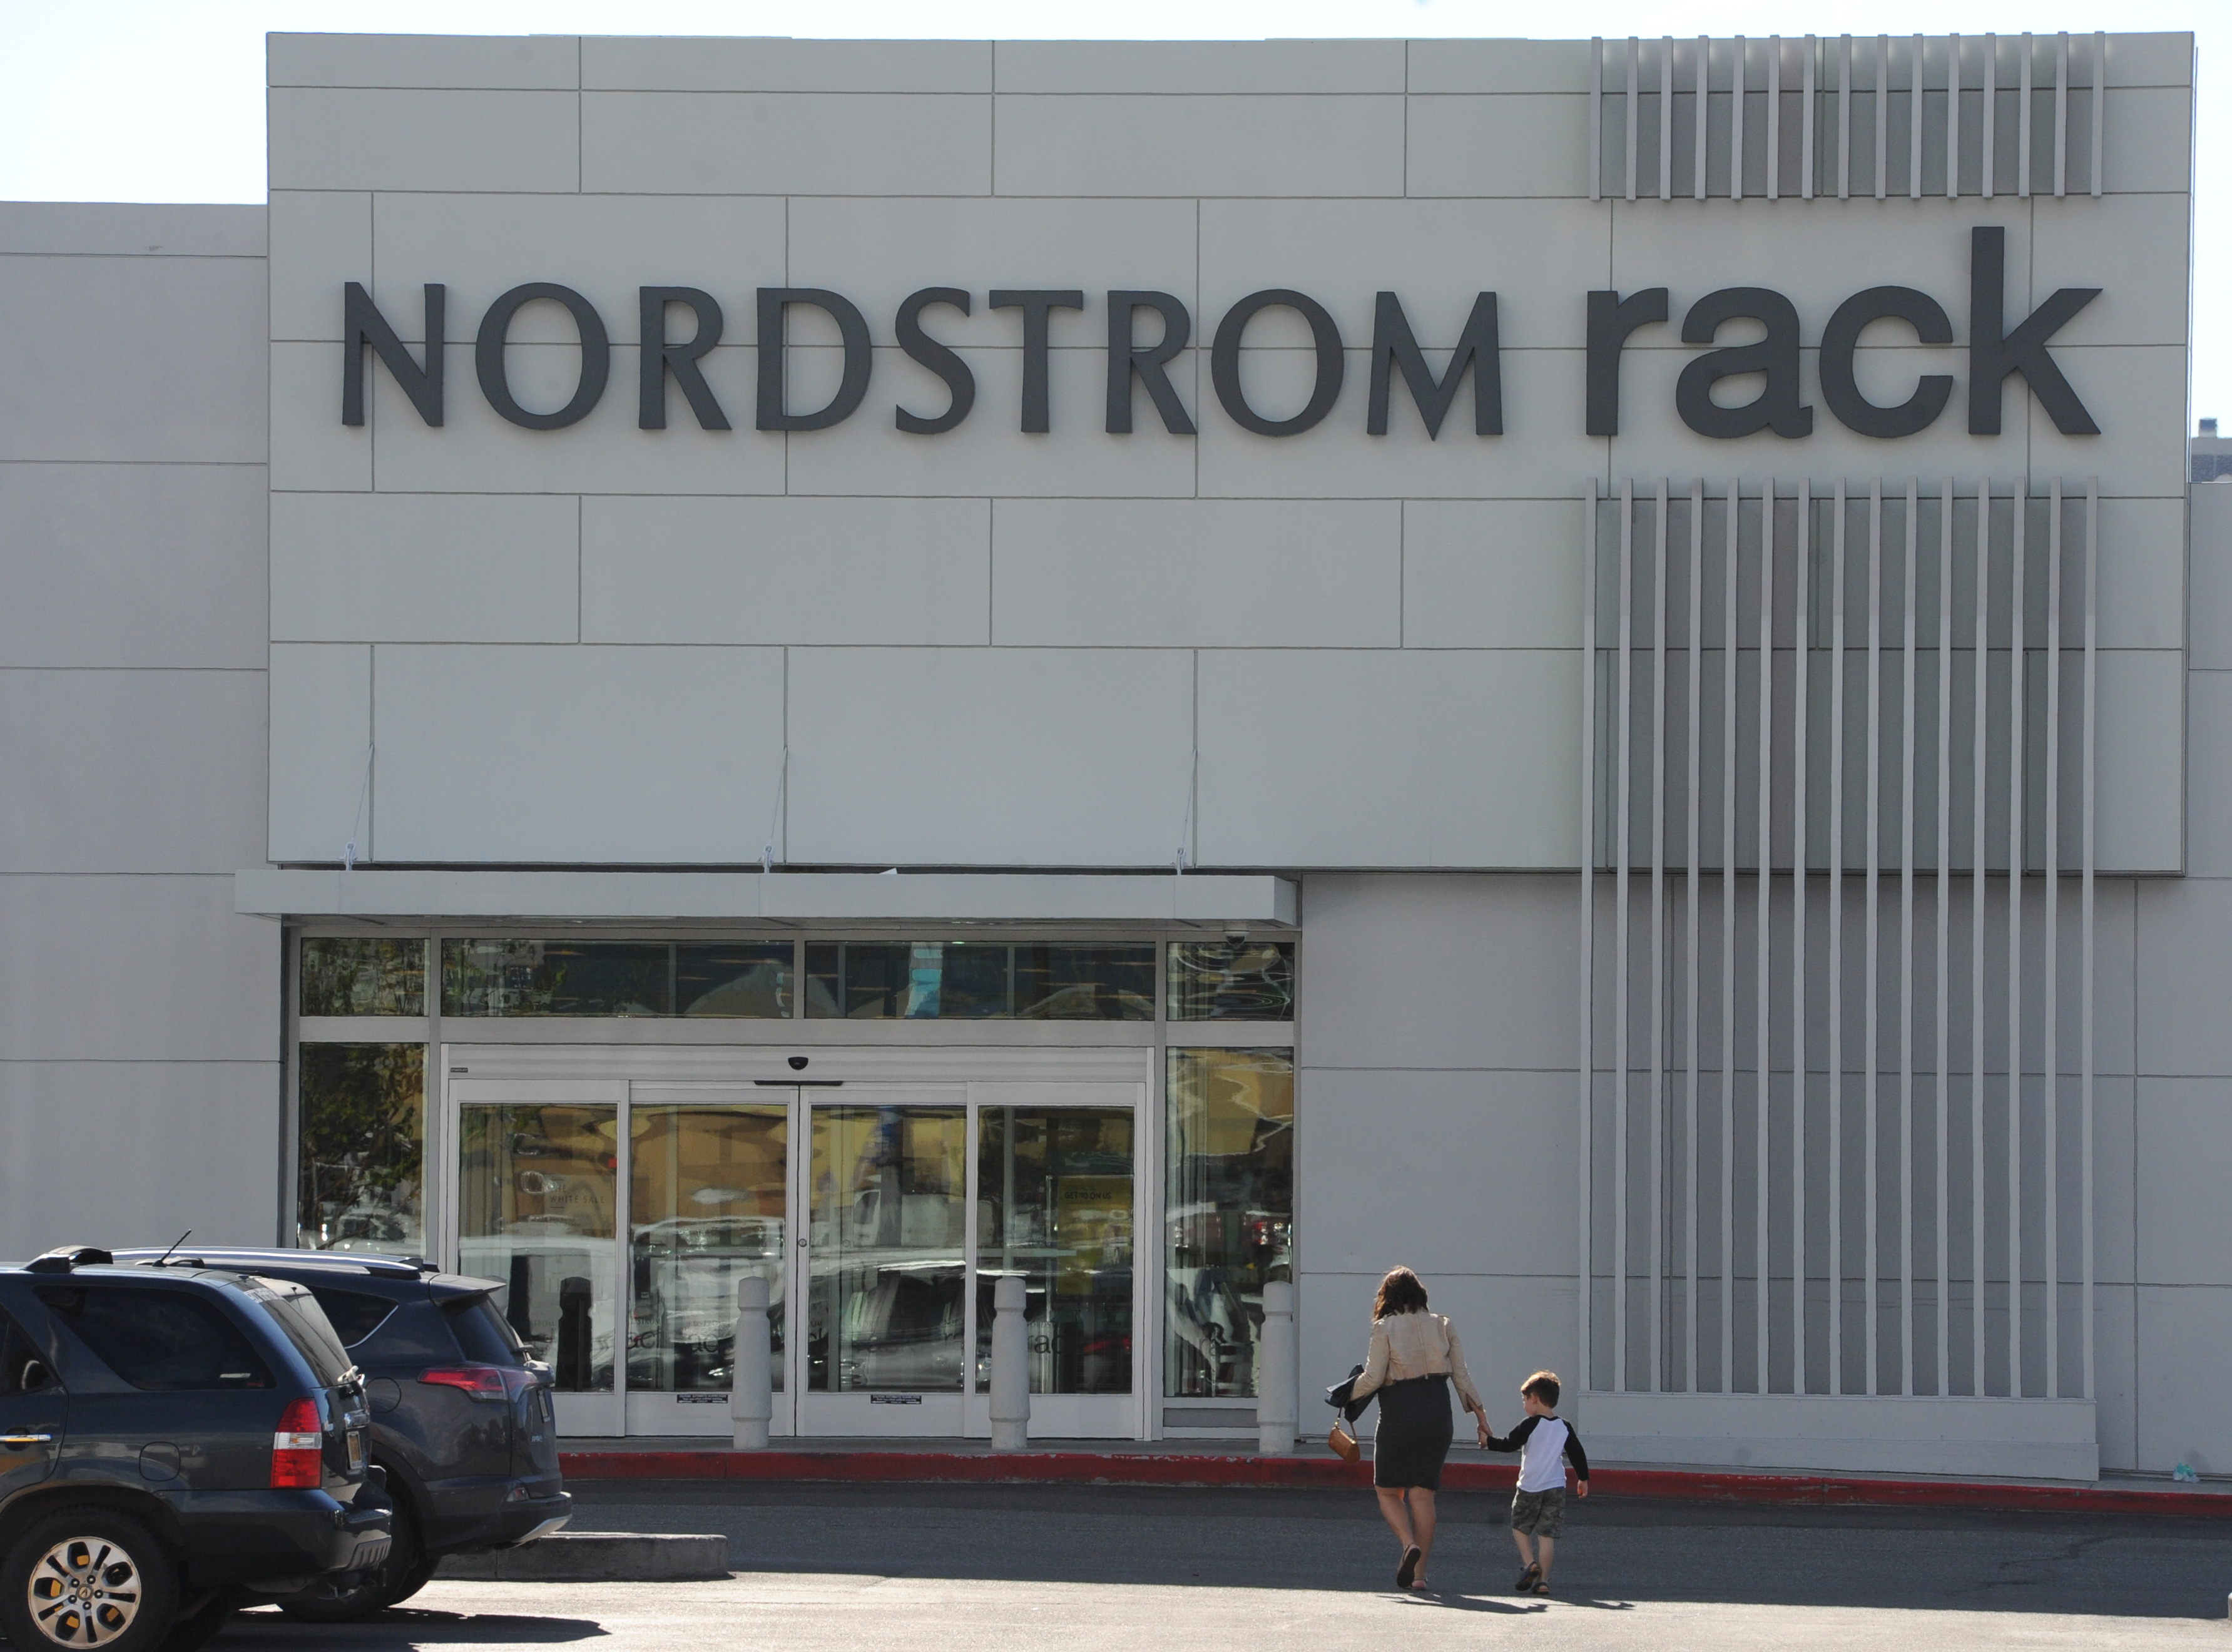 Resale and retail can peacefully coexist': Inside Nordstrom's long